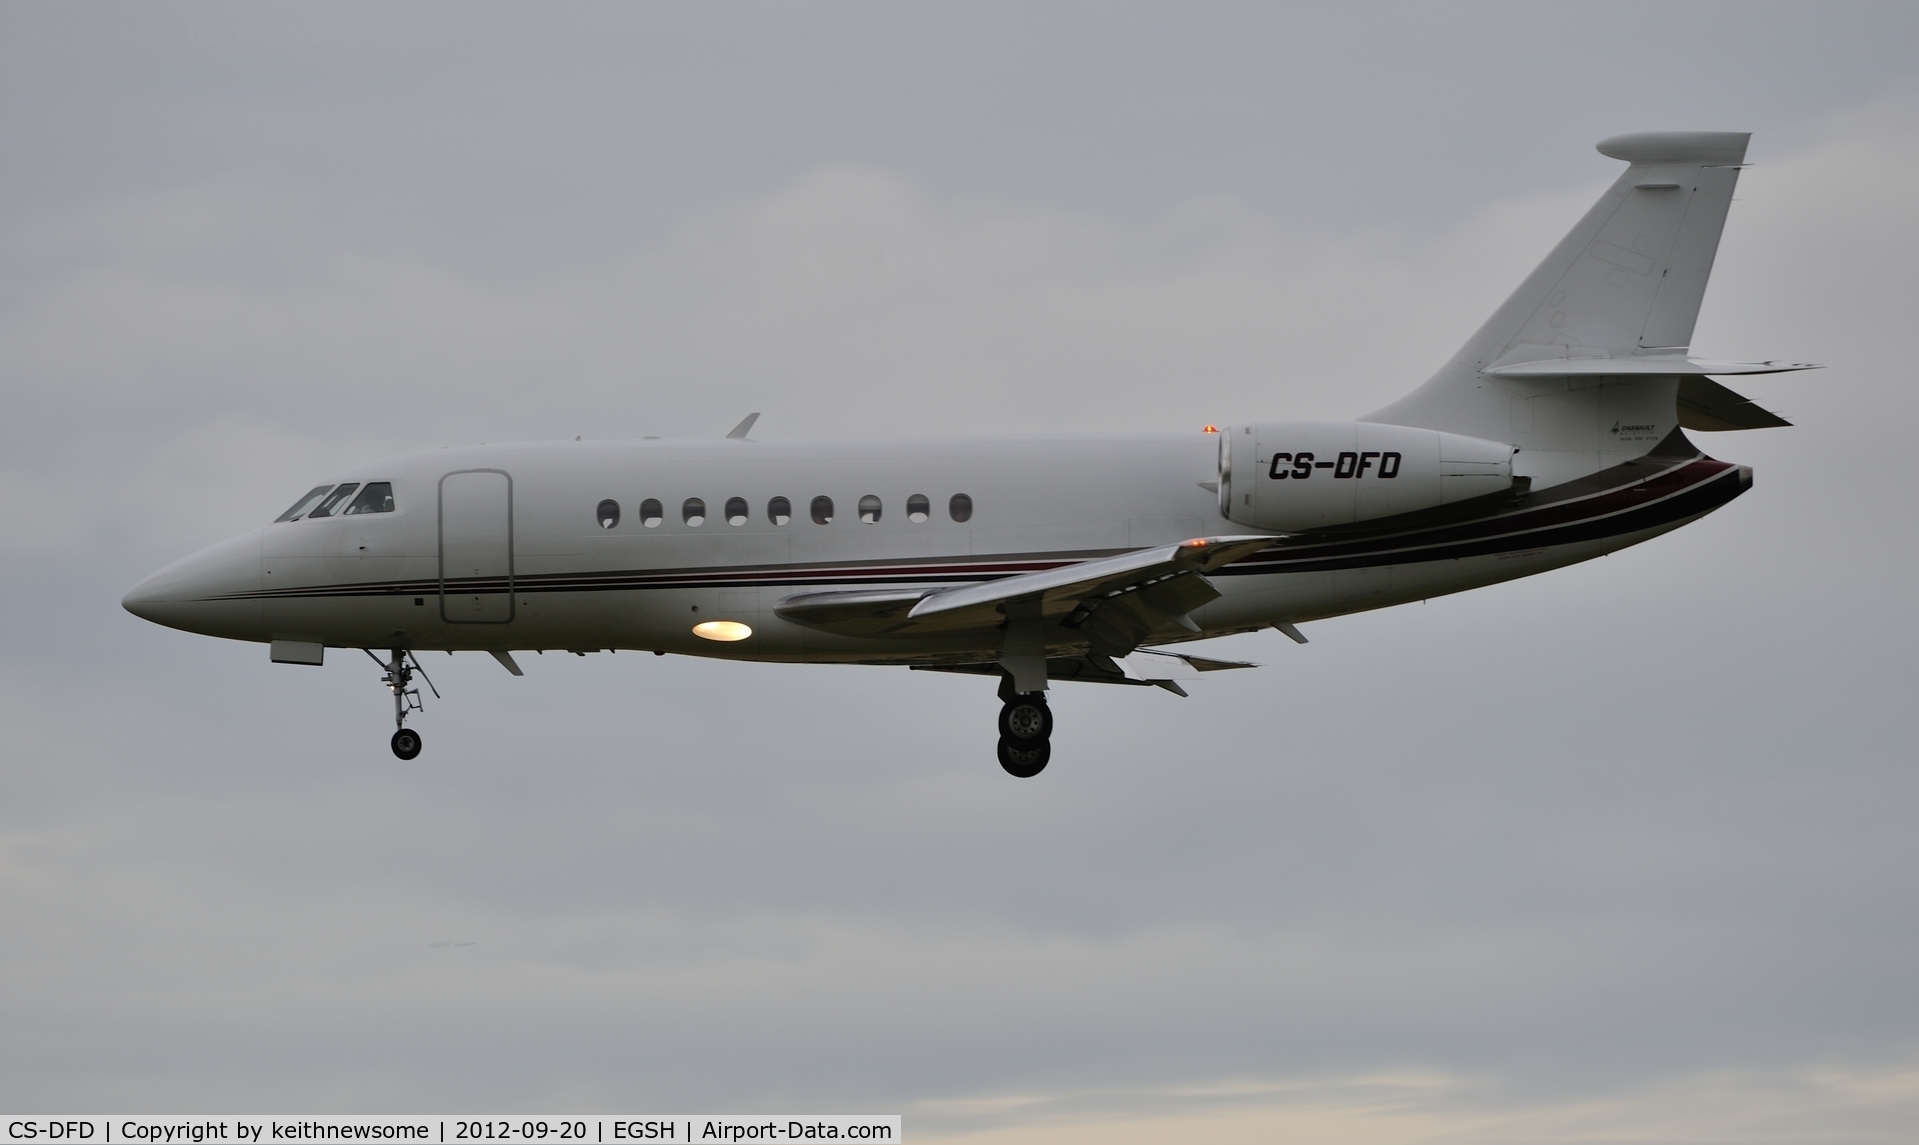 CS-DFD, 2001 Dassault Falcon 2000 C/N 174, One of the regular NetJets to visit.